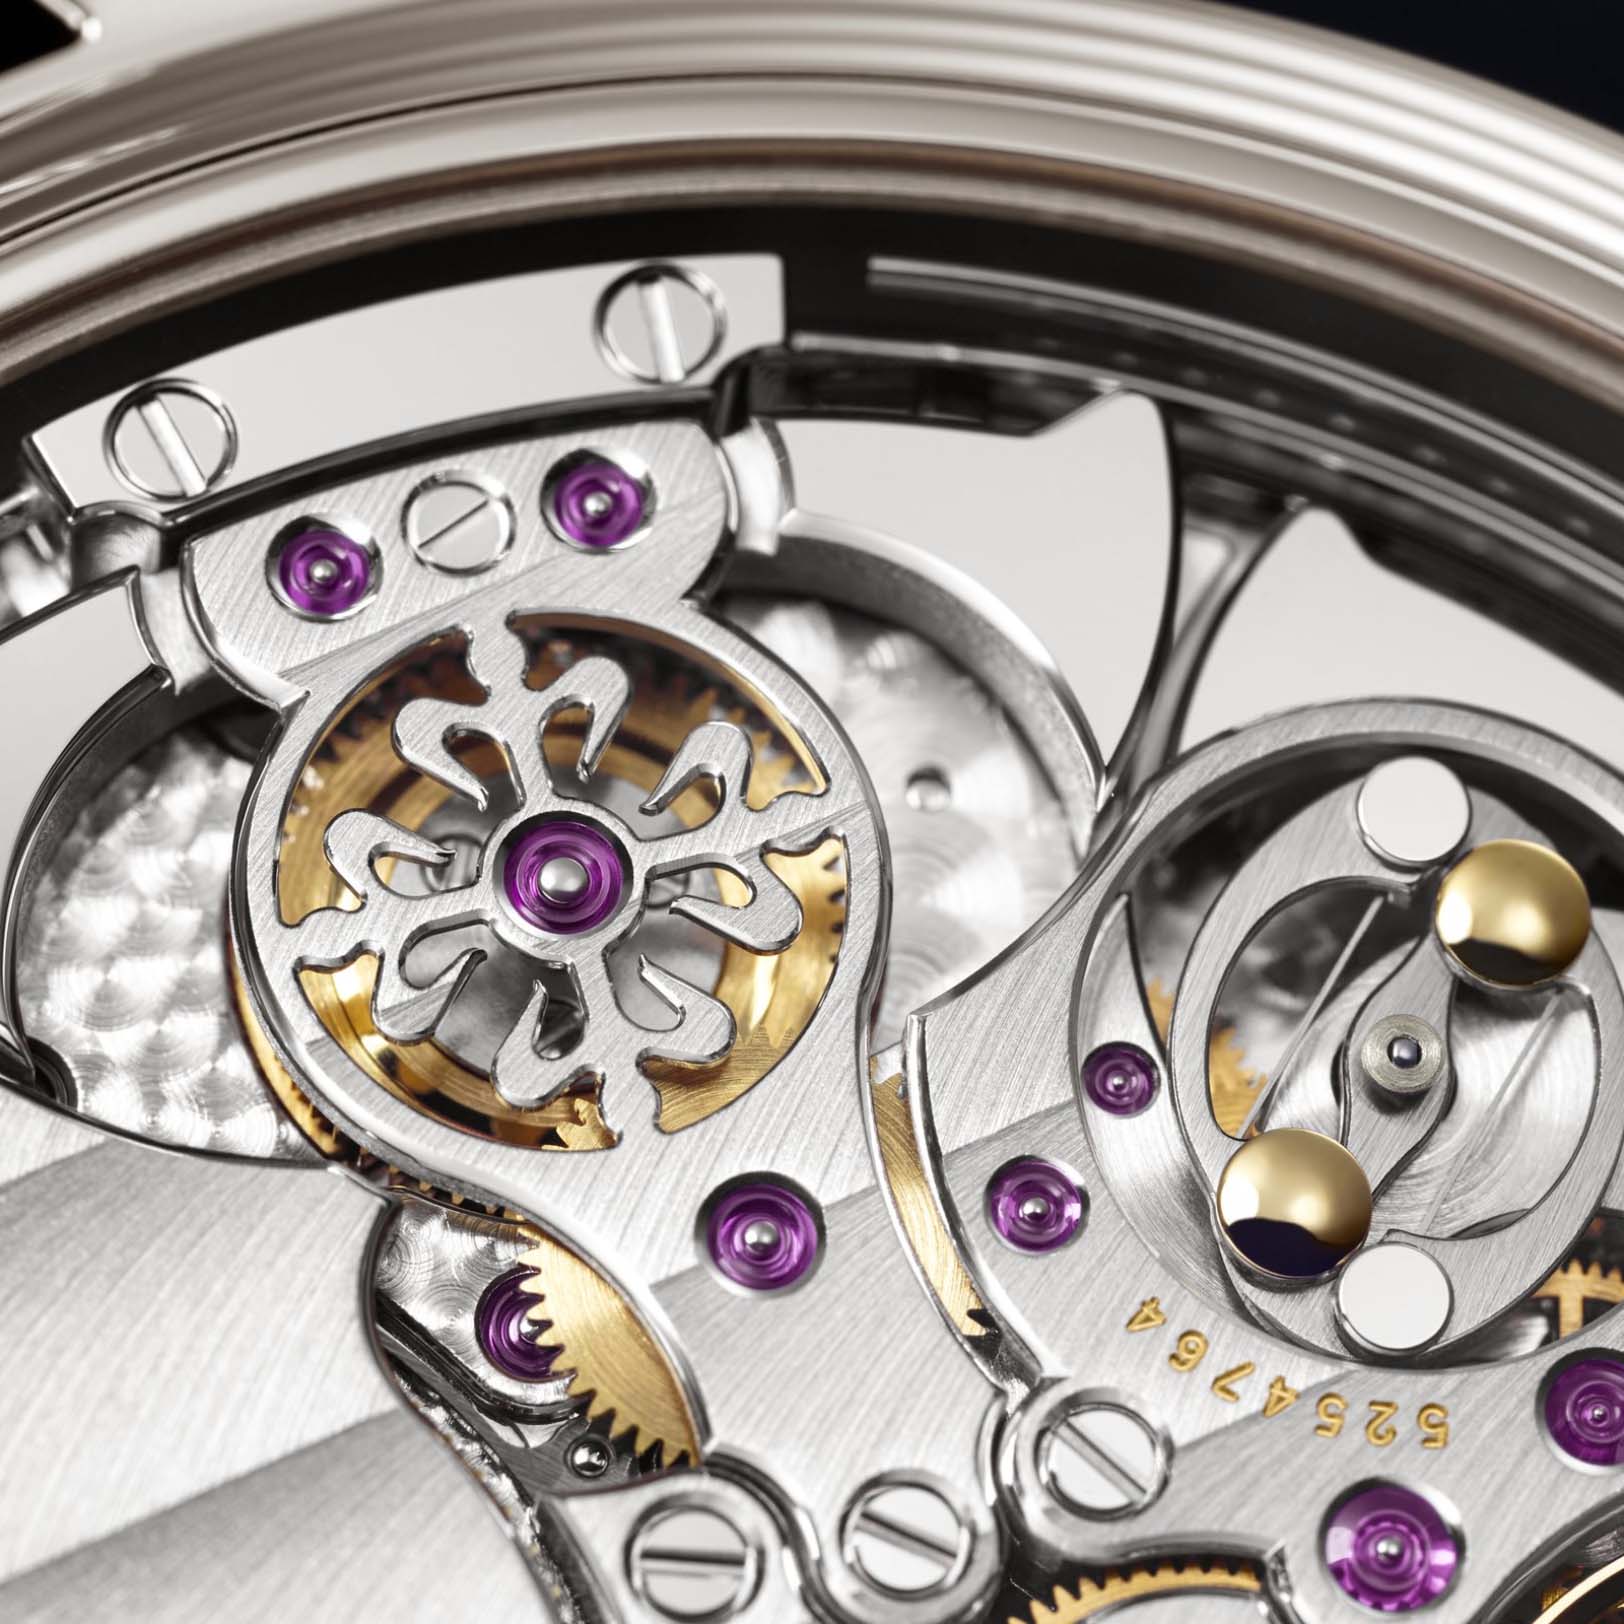 Grand Complications Grande Sonnerie Ref. 6301P gallery 14